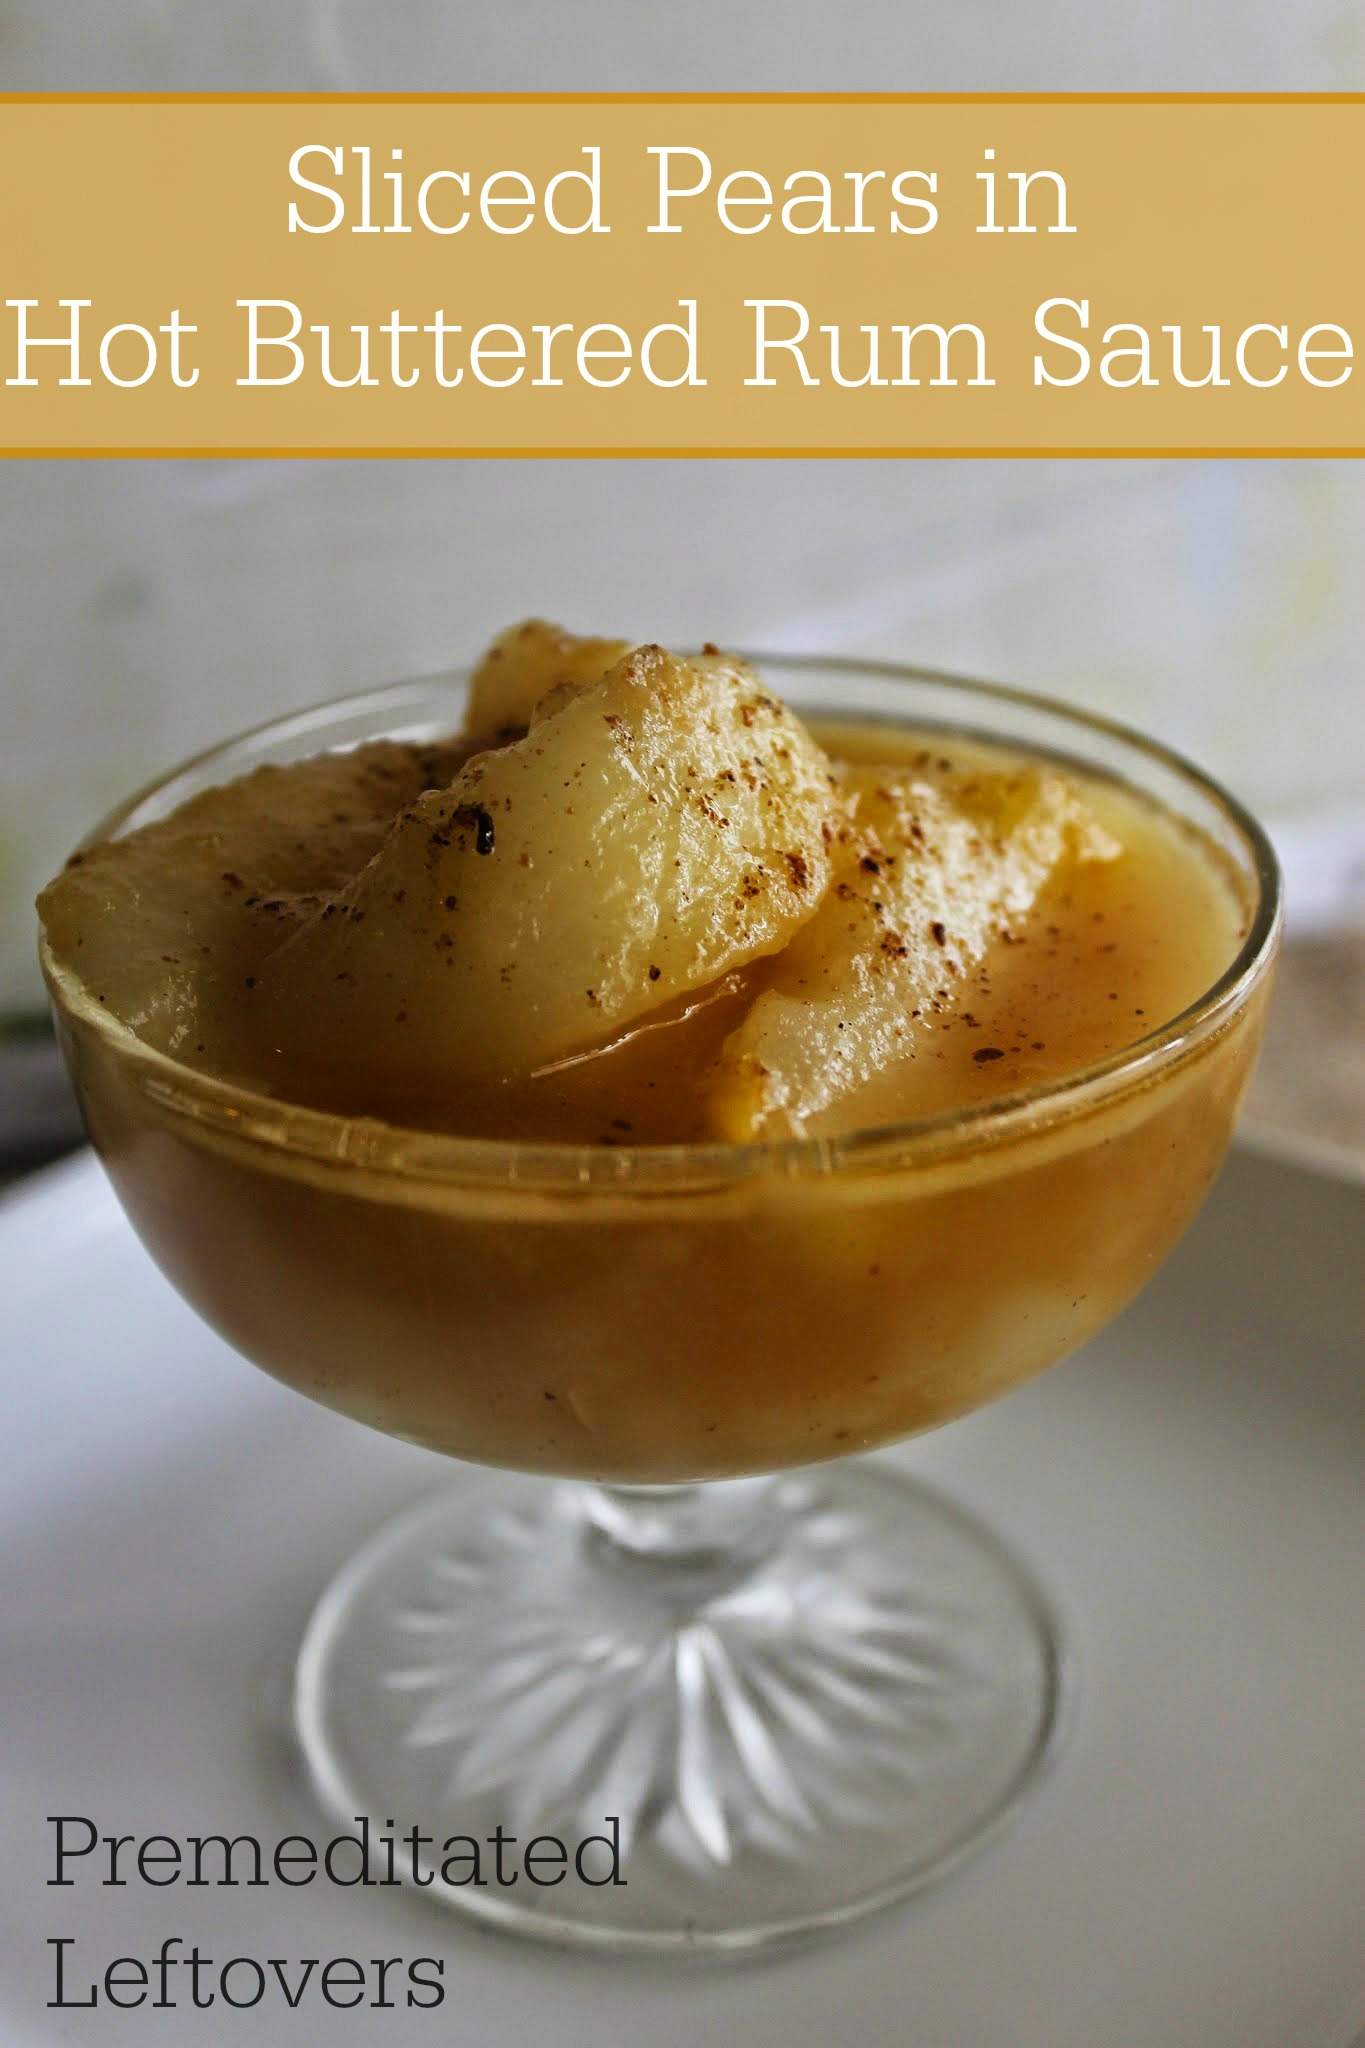 Quick and Easy Recipe for Pears in Hot Buttered Rum. This tasty Pears in Hot Buttered Rum Sauce recipe can be made in 15 minutes. Perfect holiday dessert.